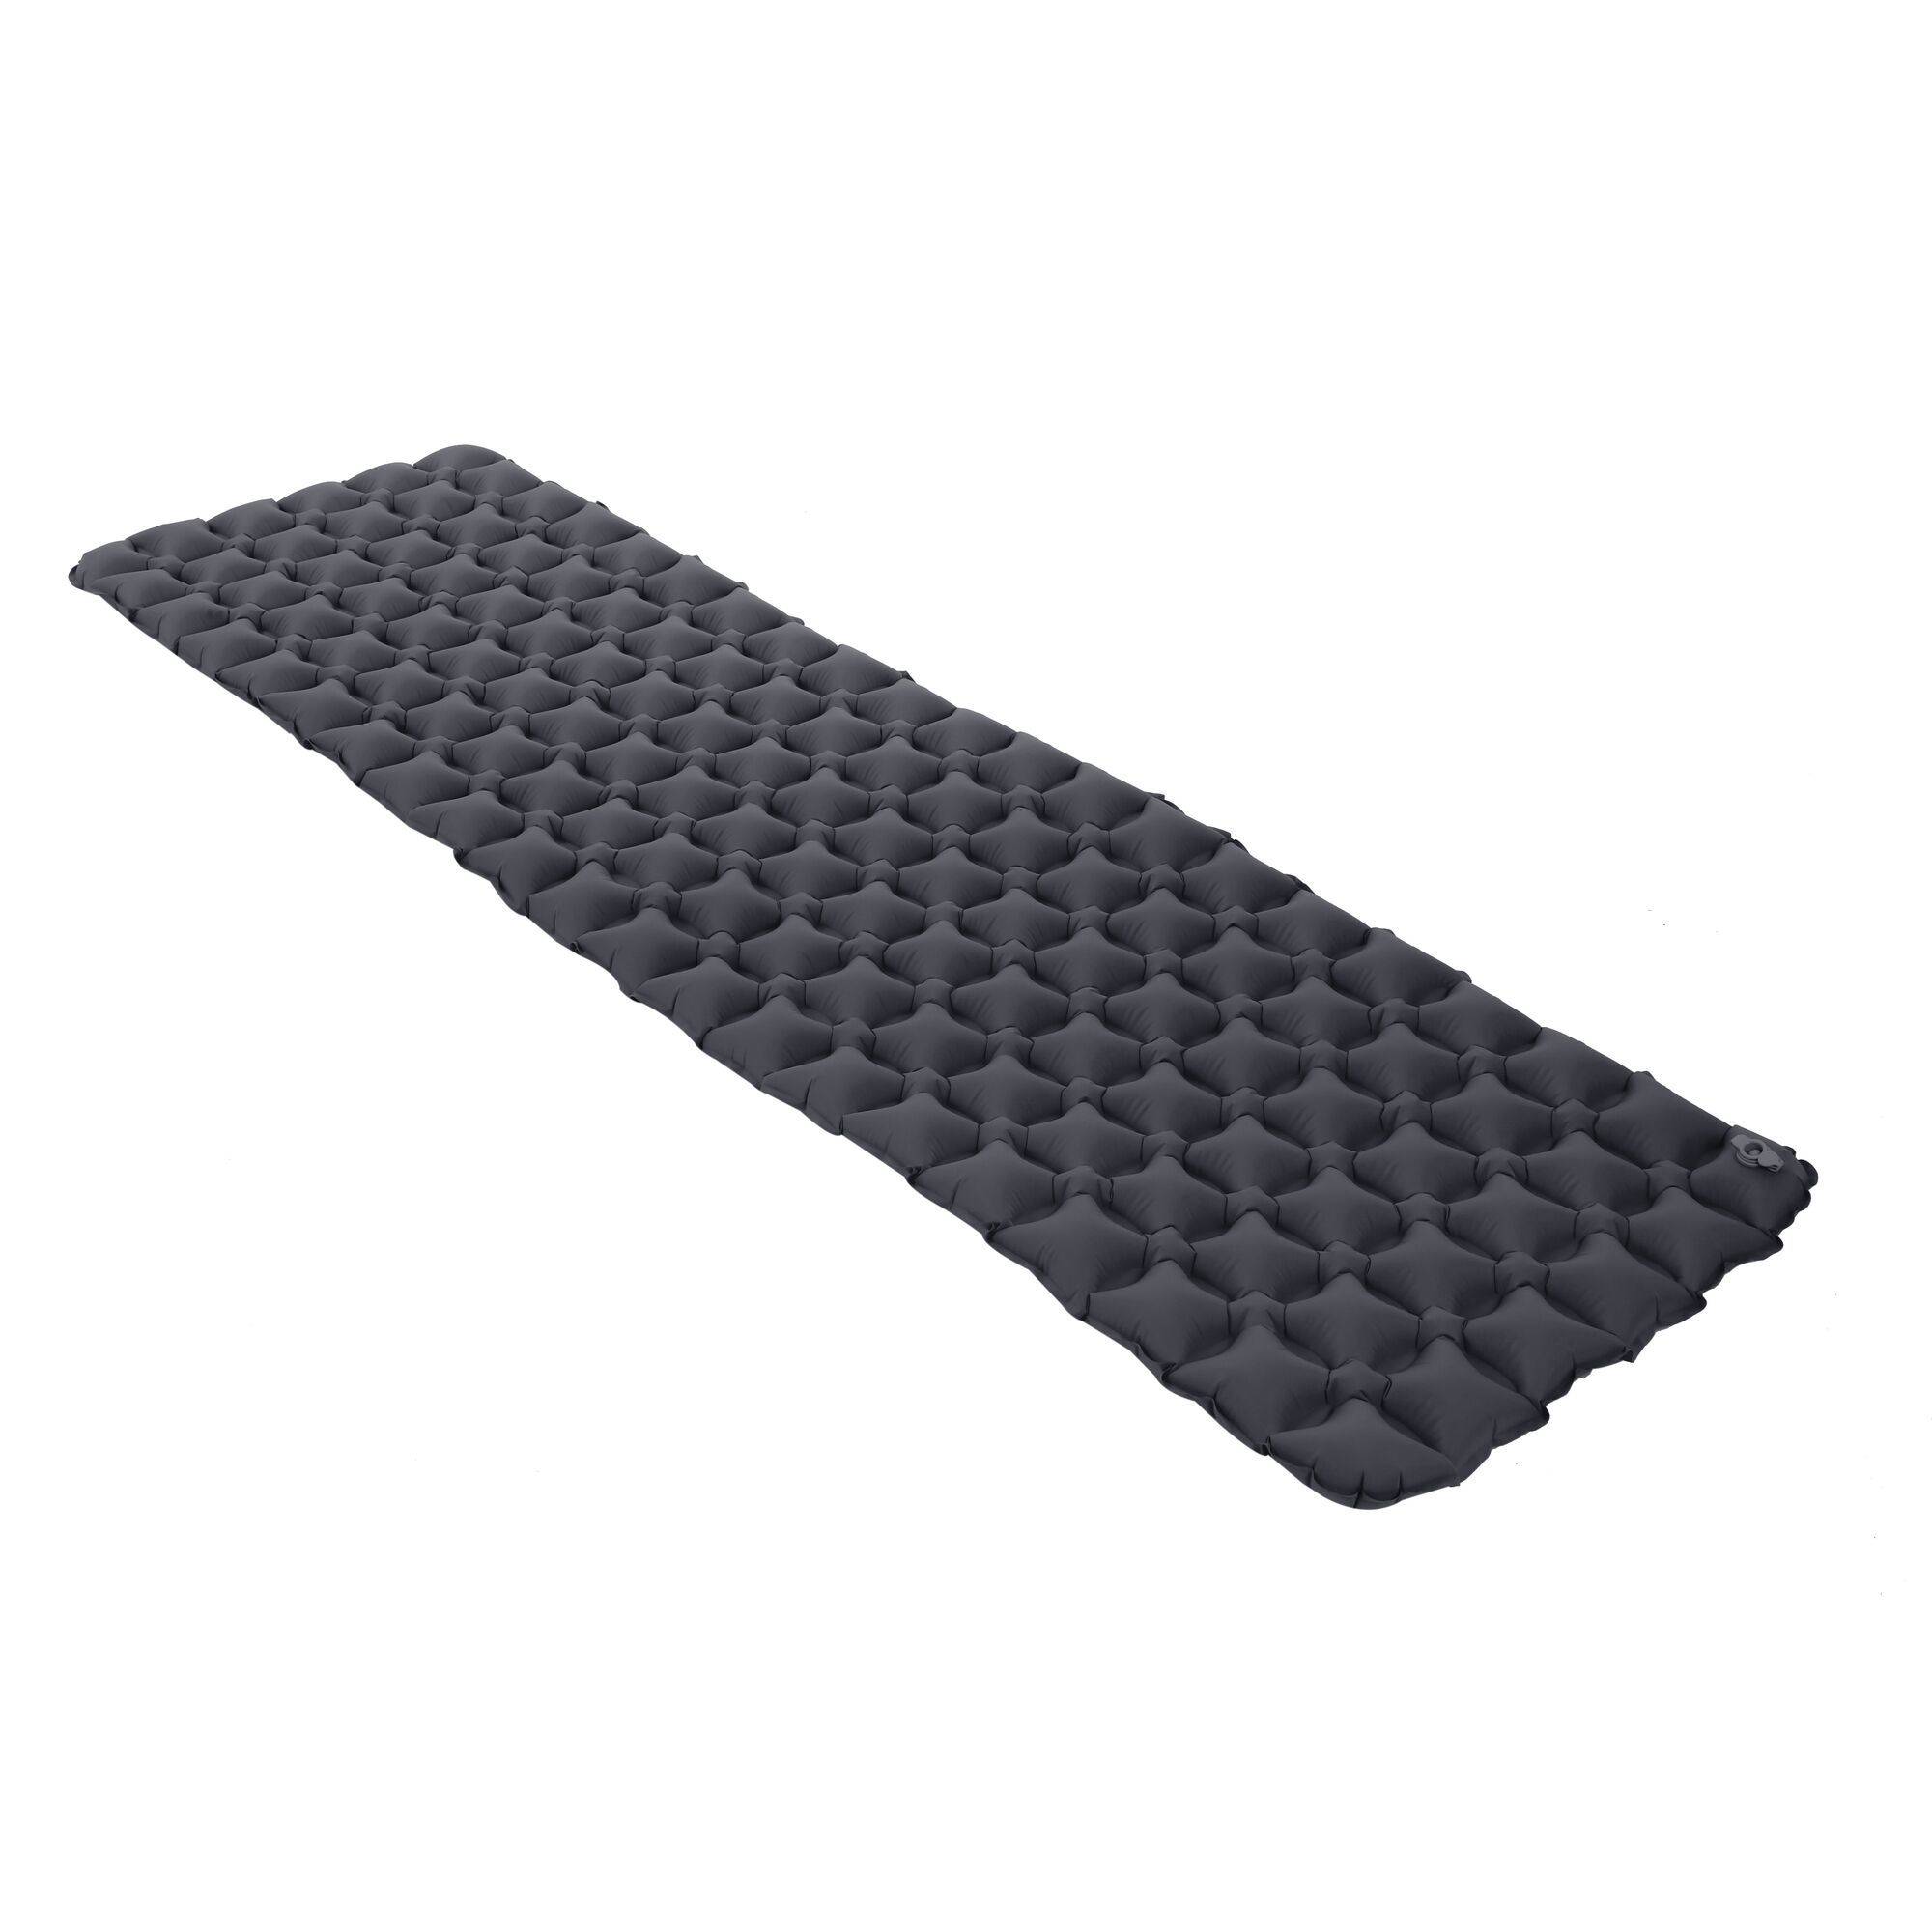 Regatta Backpacking Airbed - Ebony Grey Small Pack Size